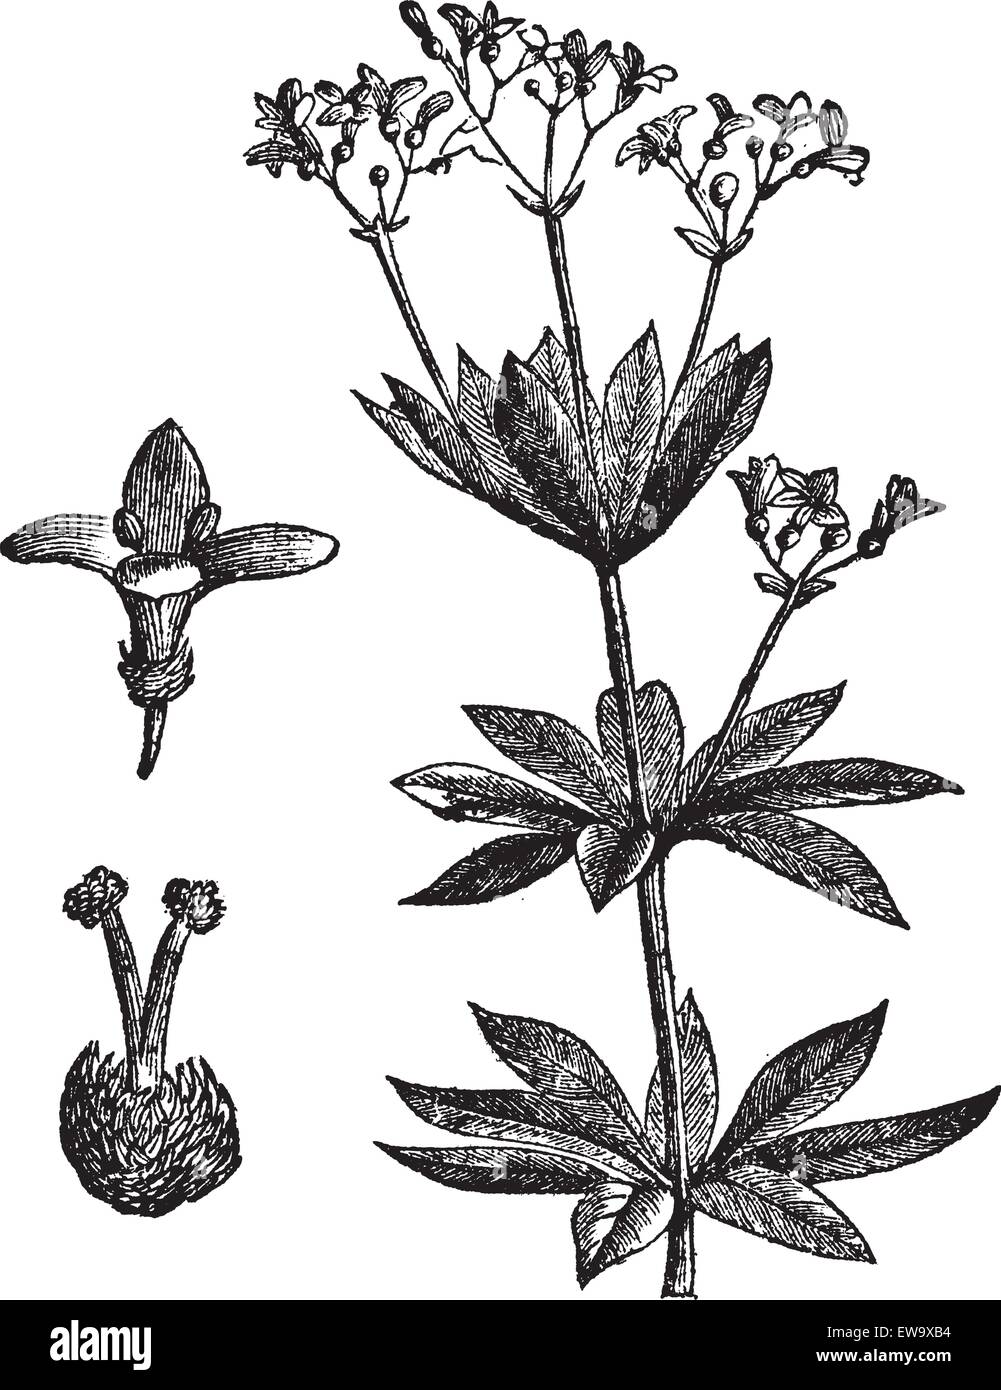 Asperula odorate or Sweet woodruff vintage engraving. Old engraved illustration of the asperula plant and flower closeup, isolated against a white background Stock Vector